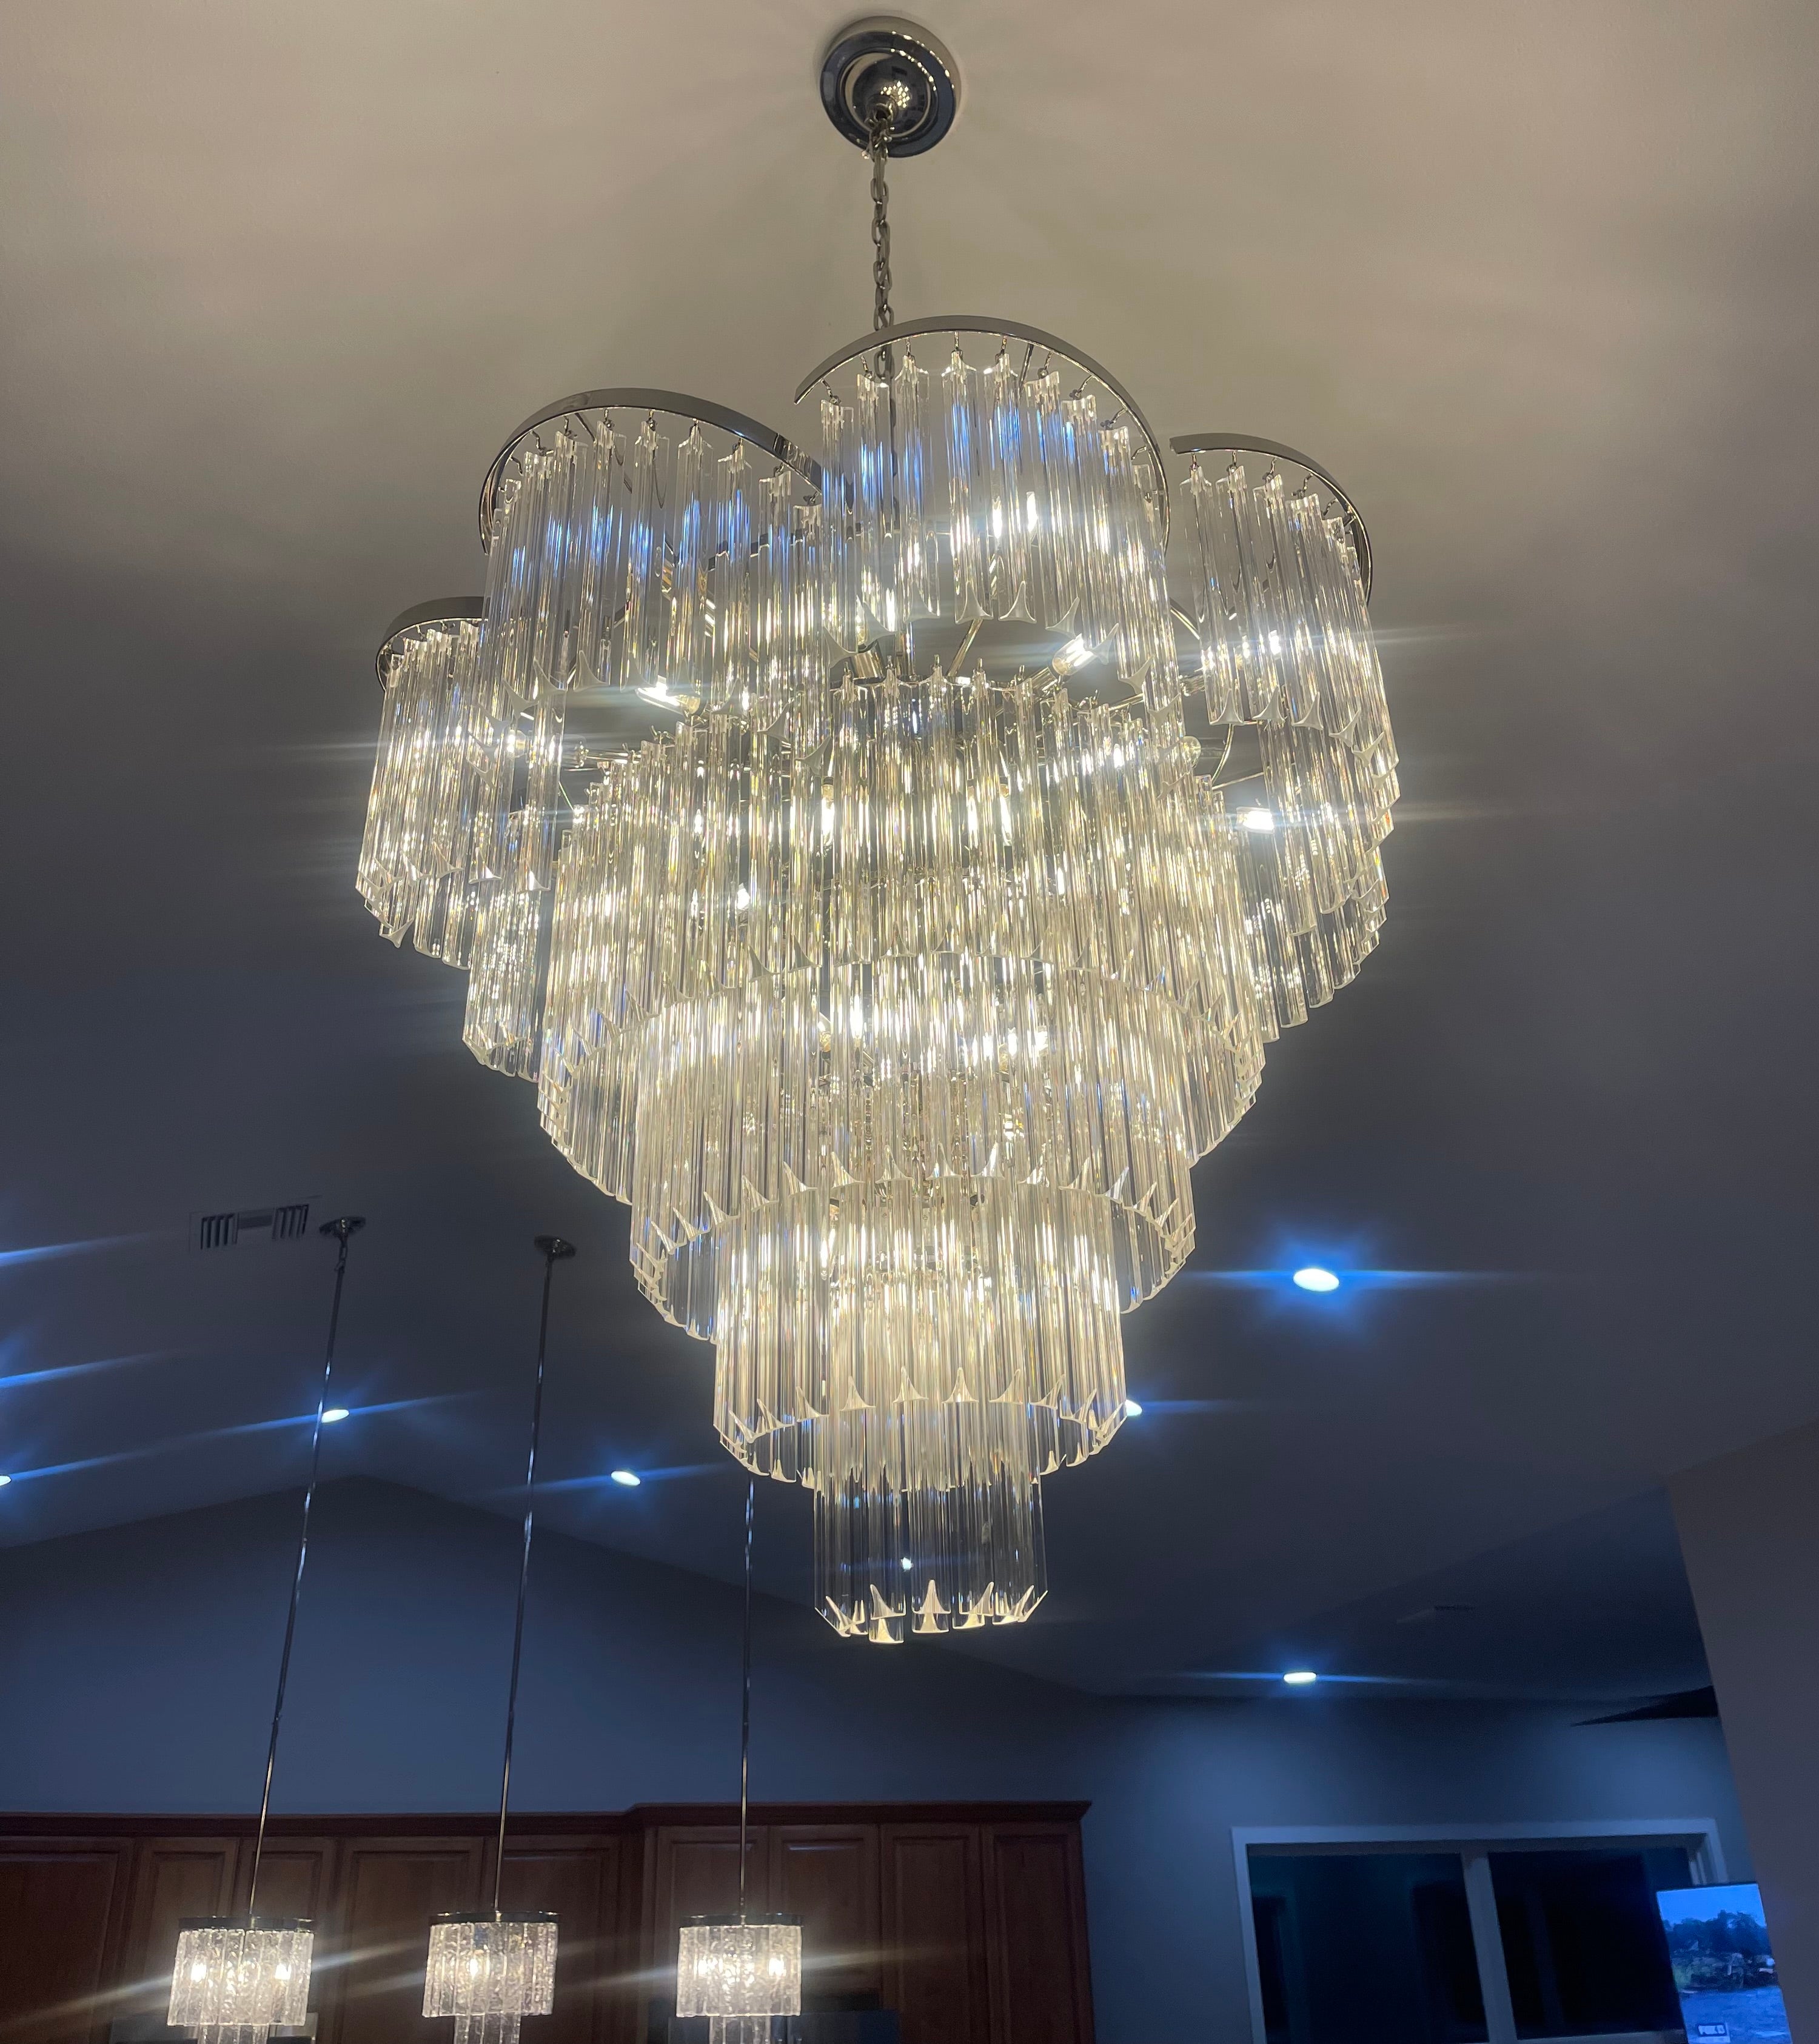 Twin Palms Round Crystal Chandelier - Italian Concept